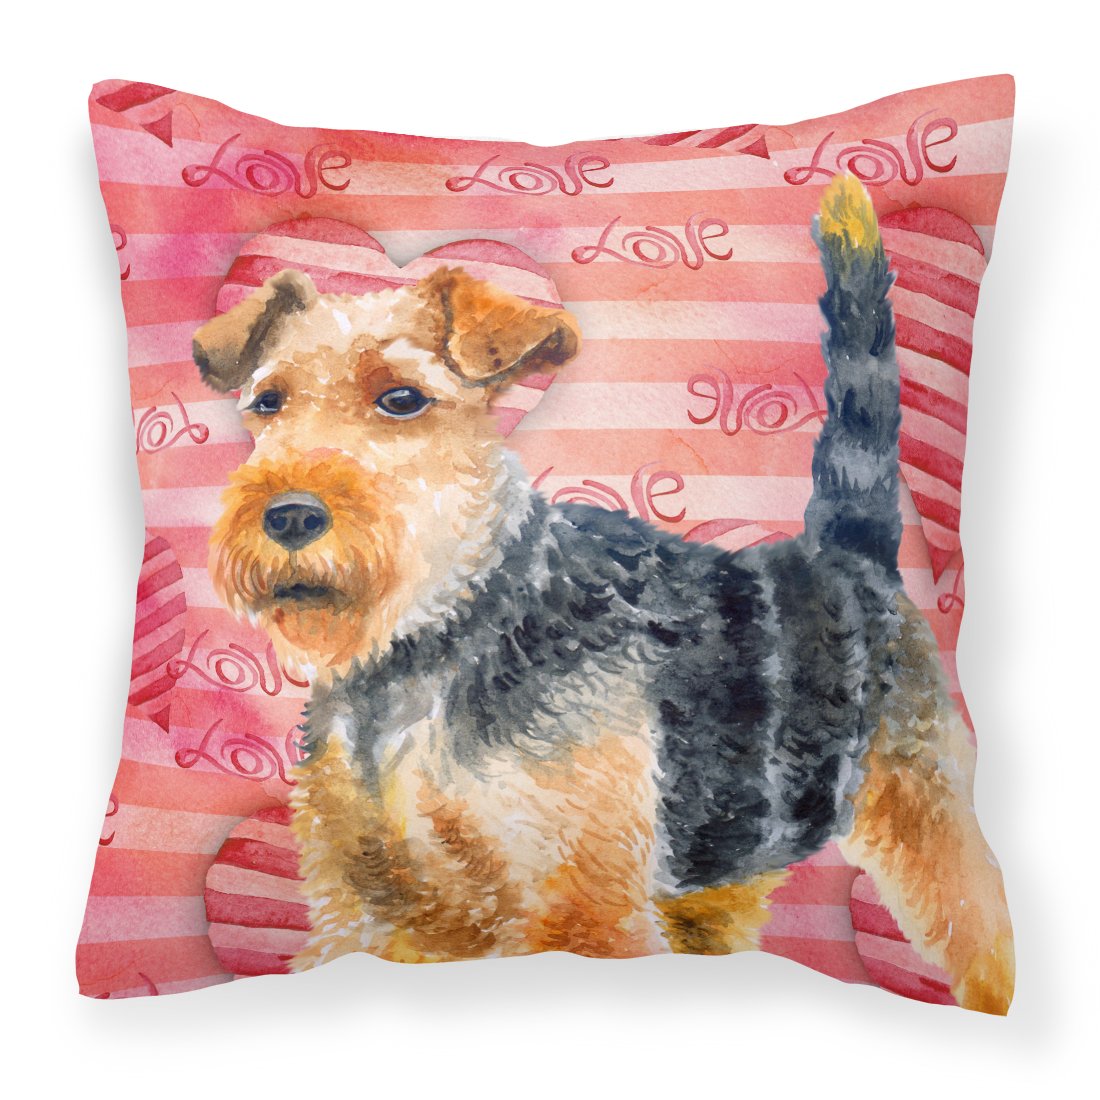 Welsh Terrier Love Fabric Decorative Pillow BB9787PW1818 by Caroline's Treasures